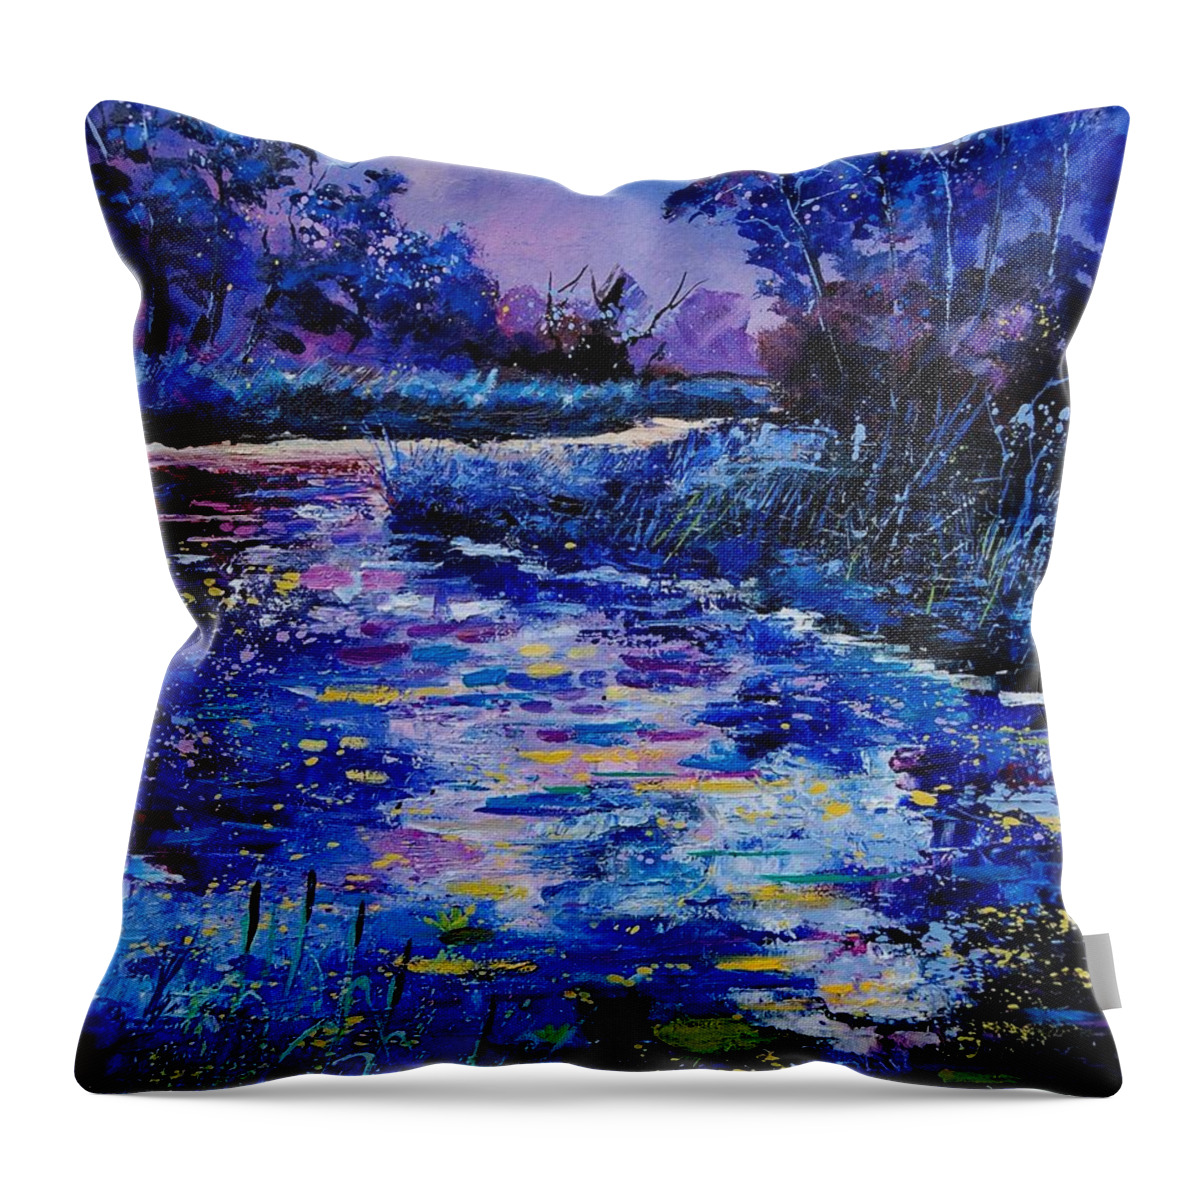 River Throw Pillow featuring the painting Magic Pond by Pol Ledent